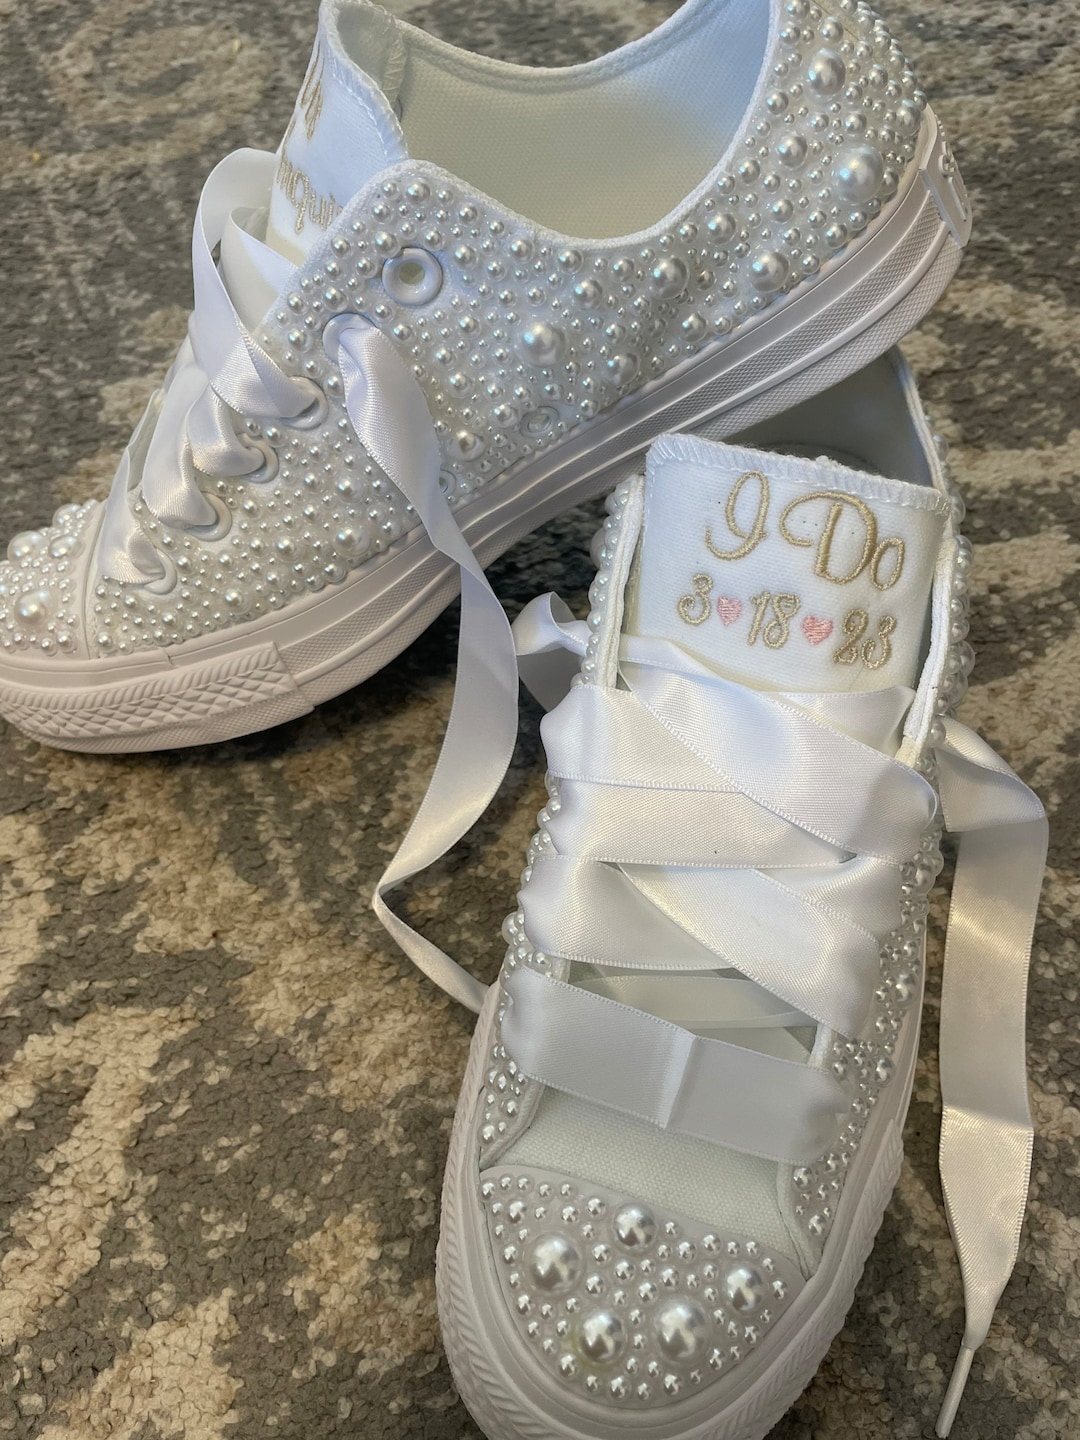 PEARL Encrusted Converse Bride Shoes Wedding Embroidered - Etsy